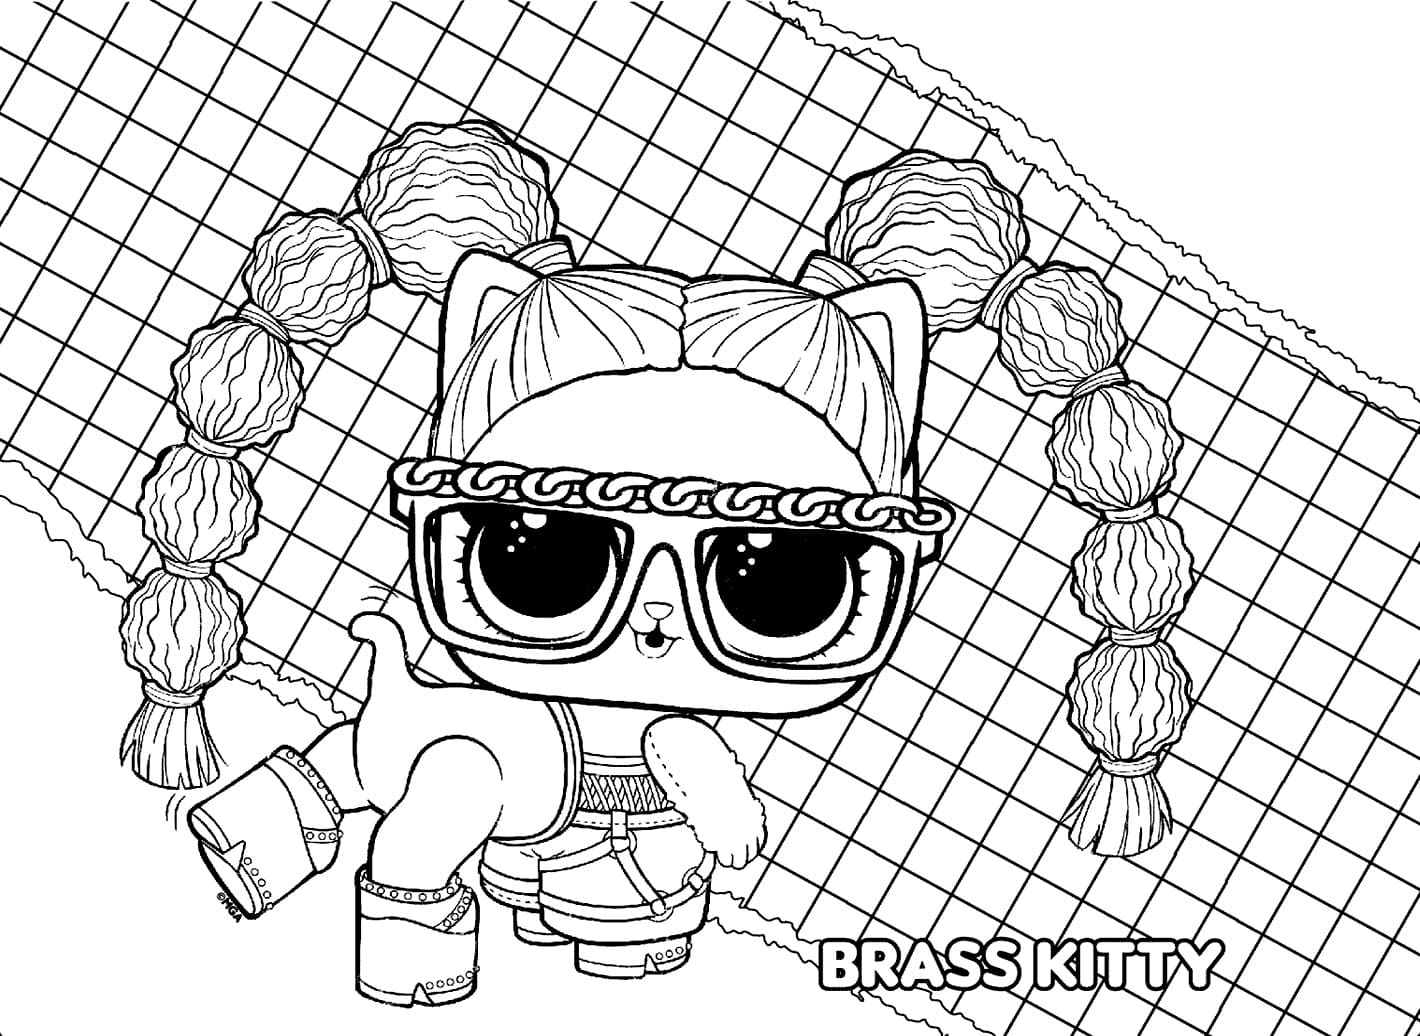 Brass Kitty LOL Surprise coloring page